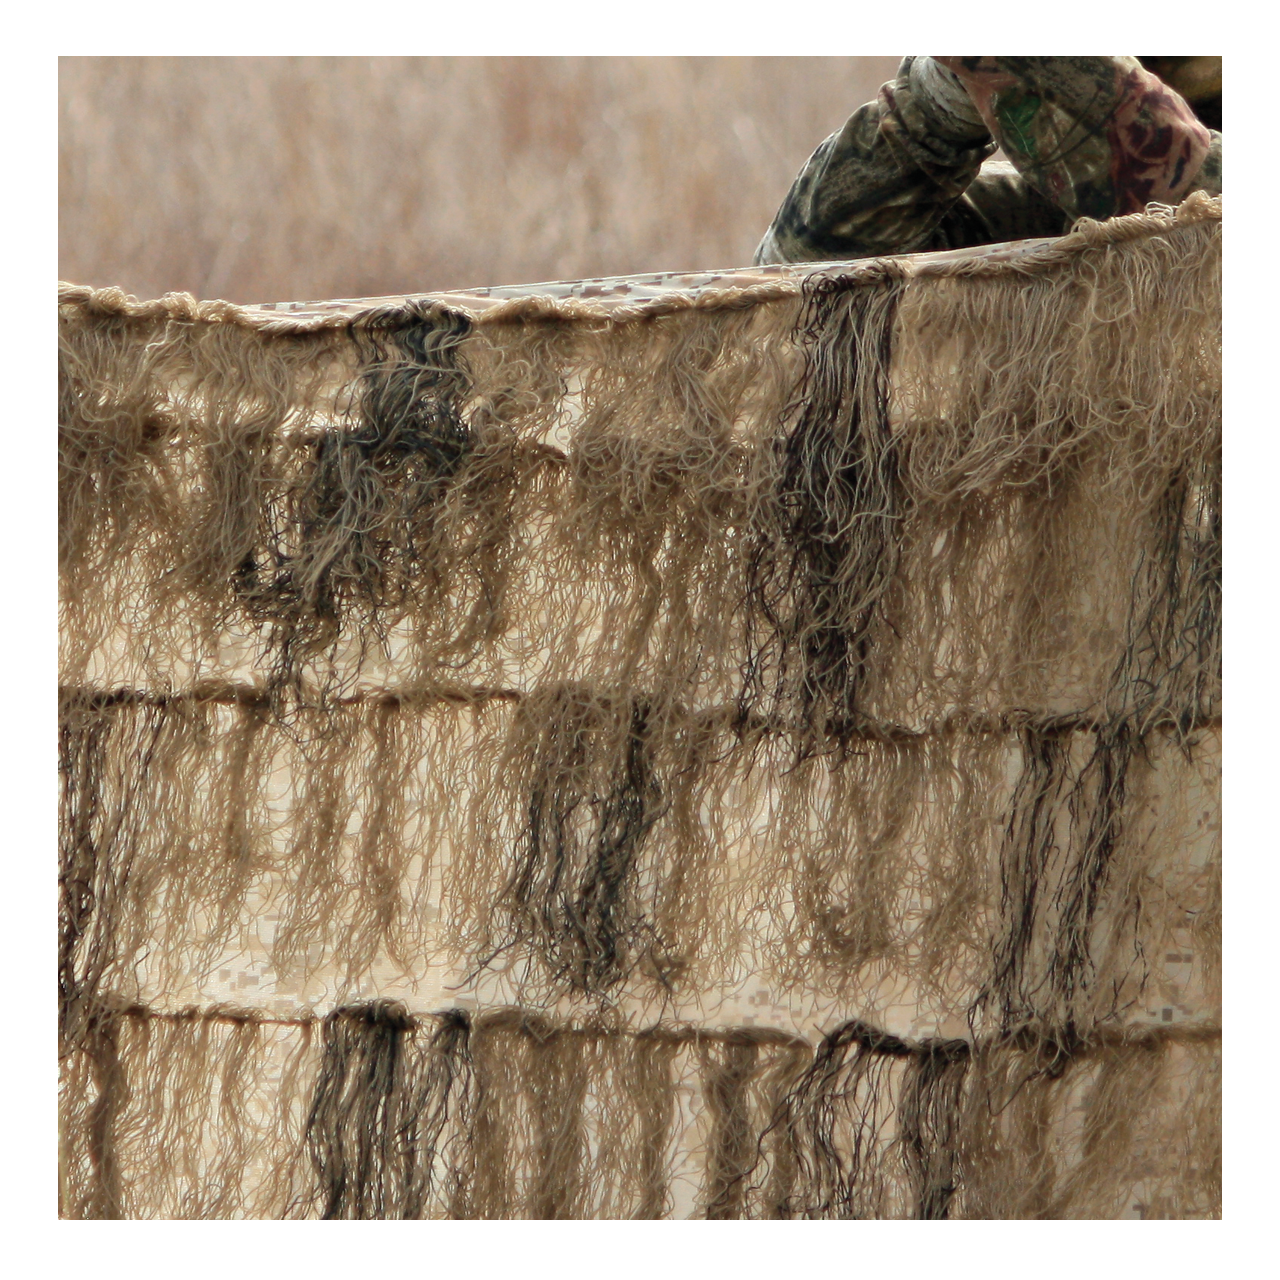 Red Rock Outdoor Gear Ghillie Blind Camouflage Netting